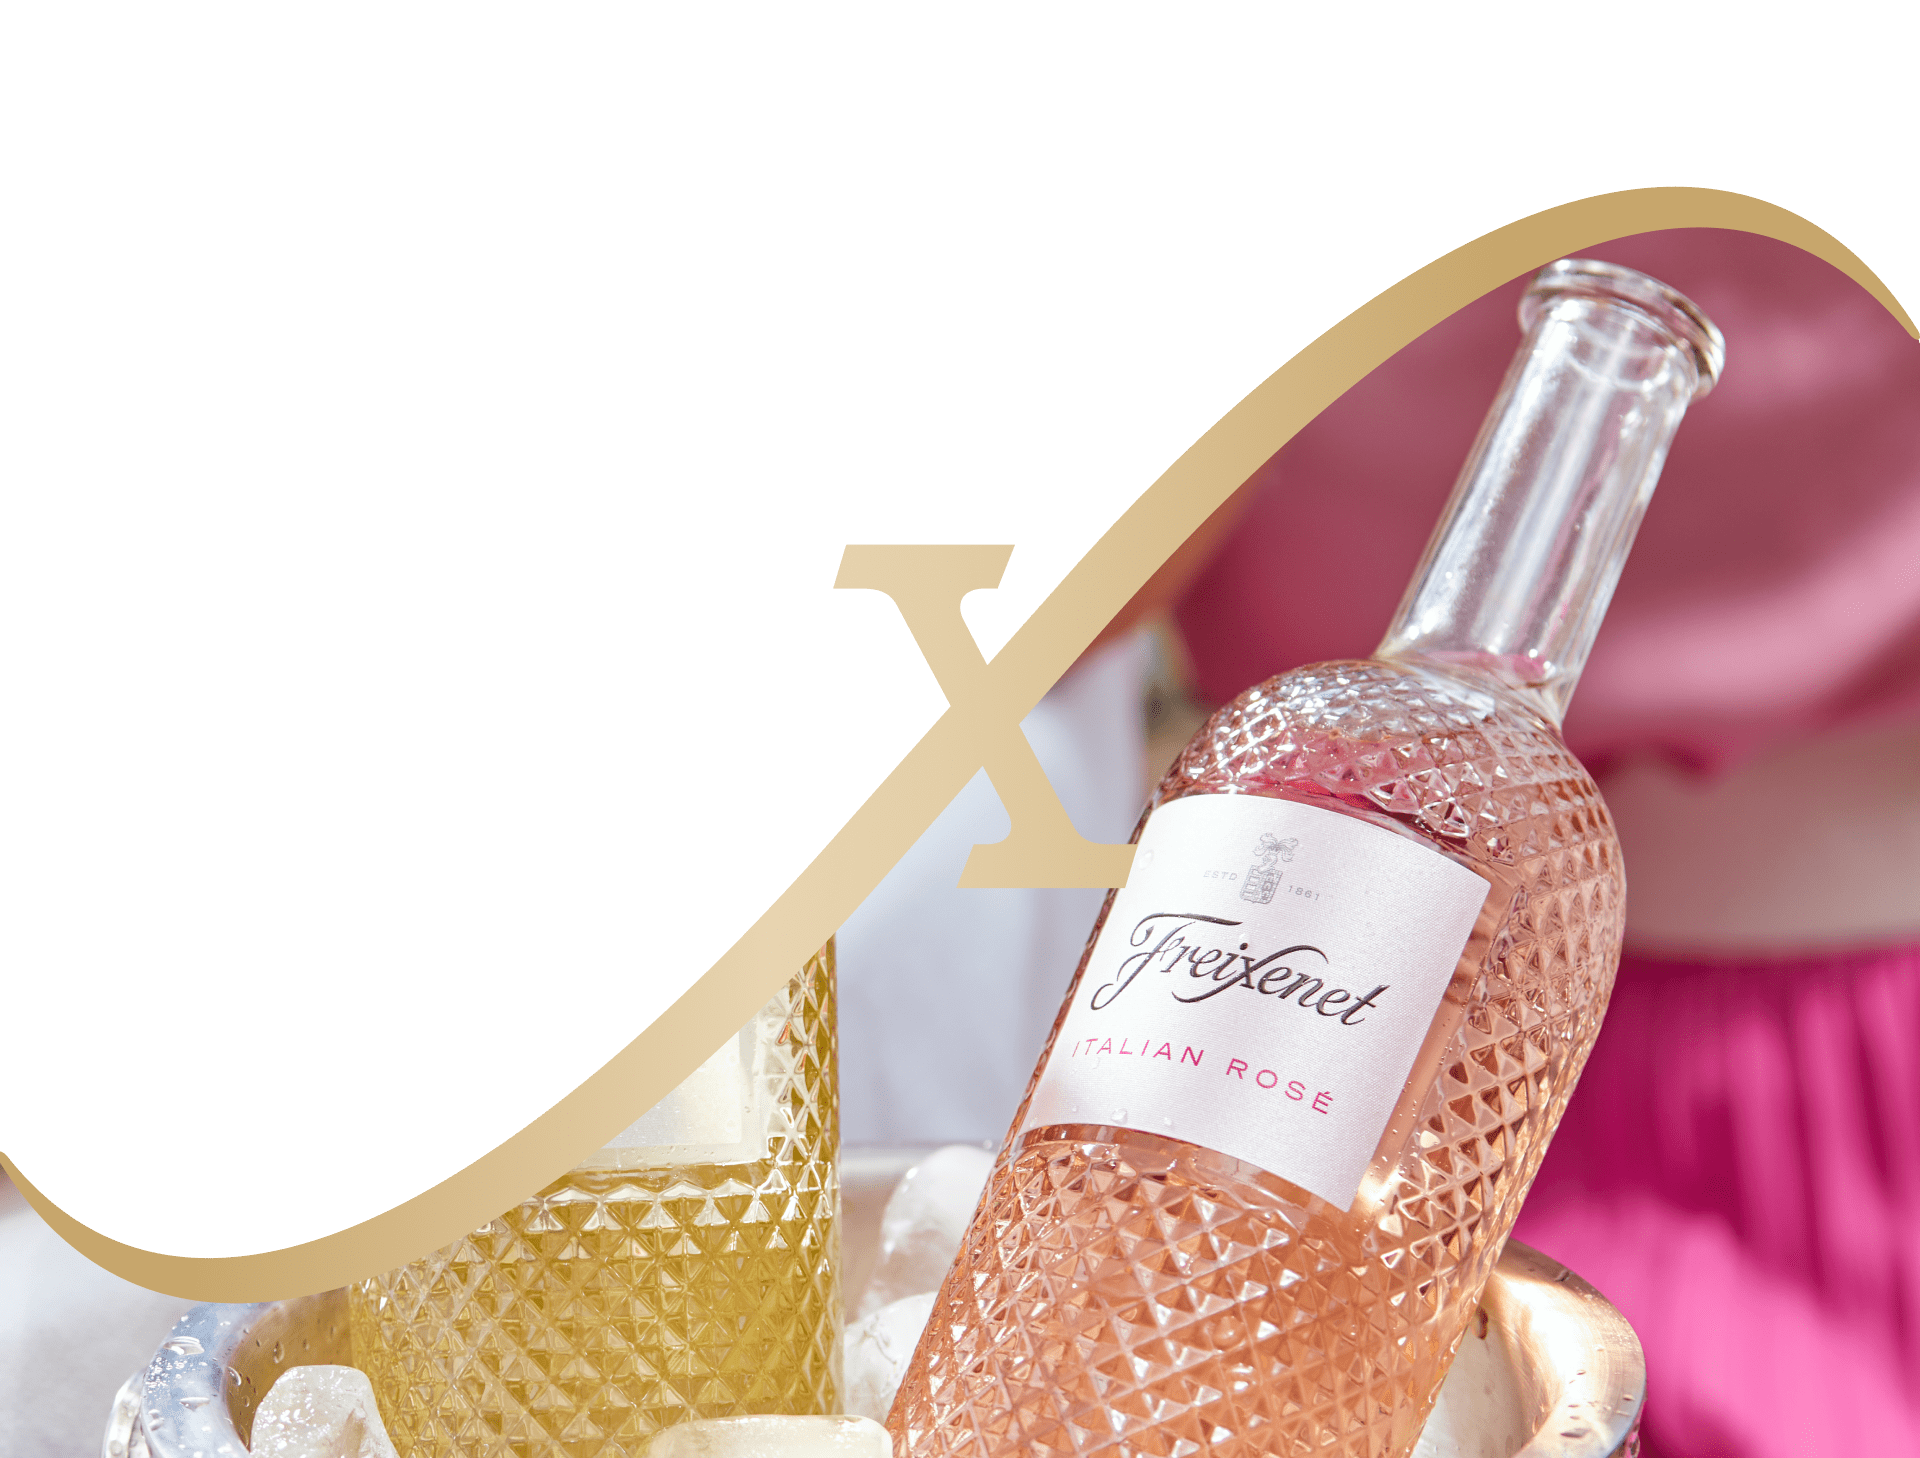 Two faceted bottles of Freixenet alcohol removed, one white and one rosé.